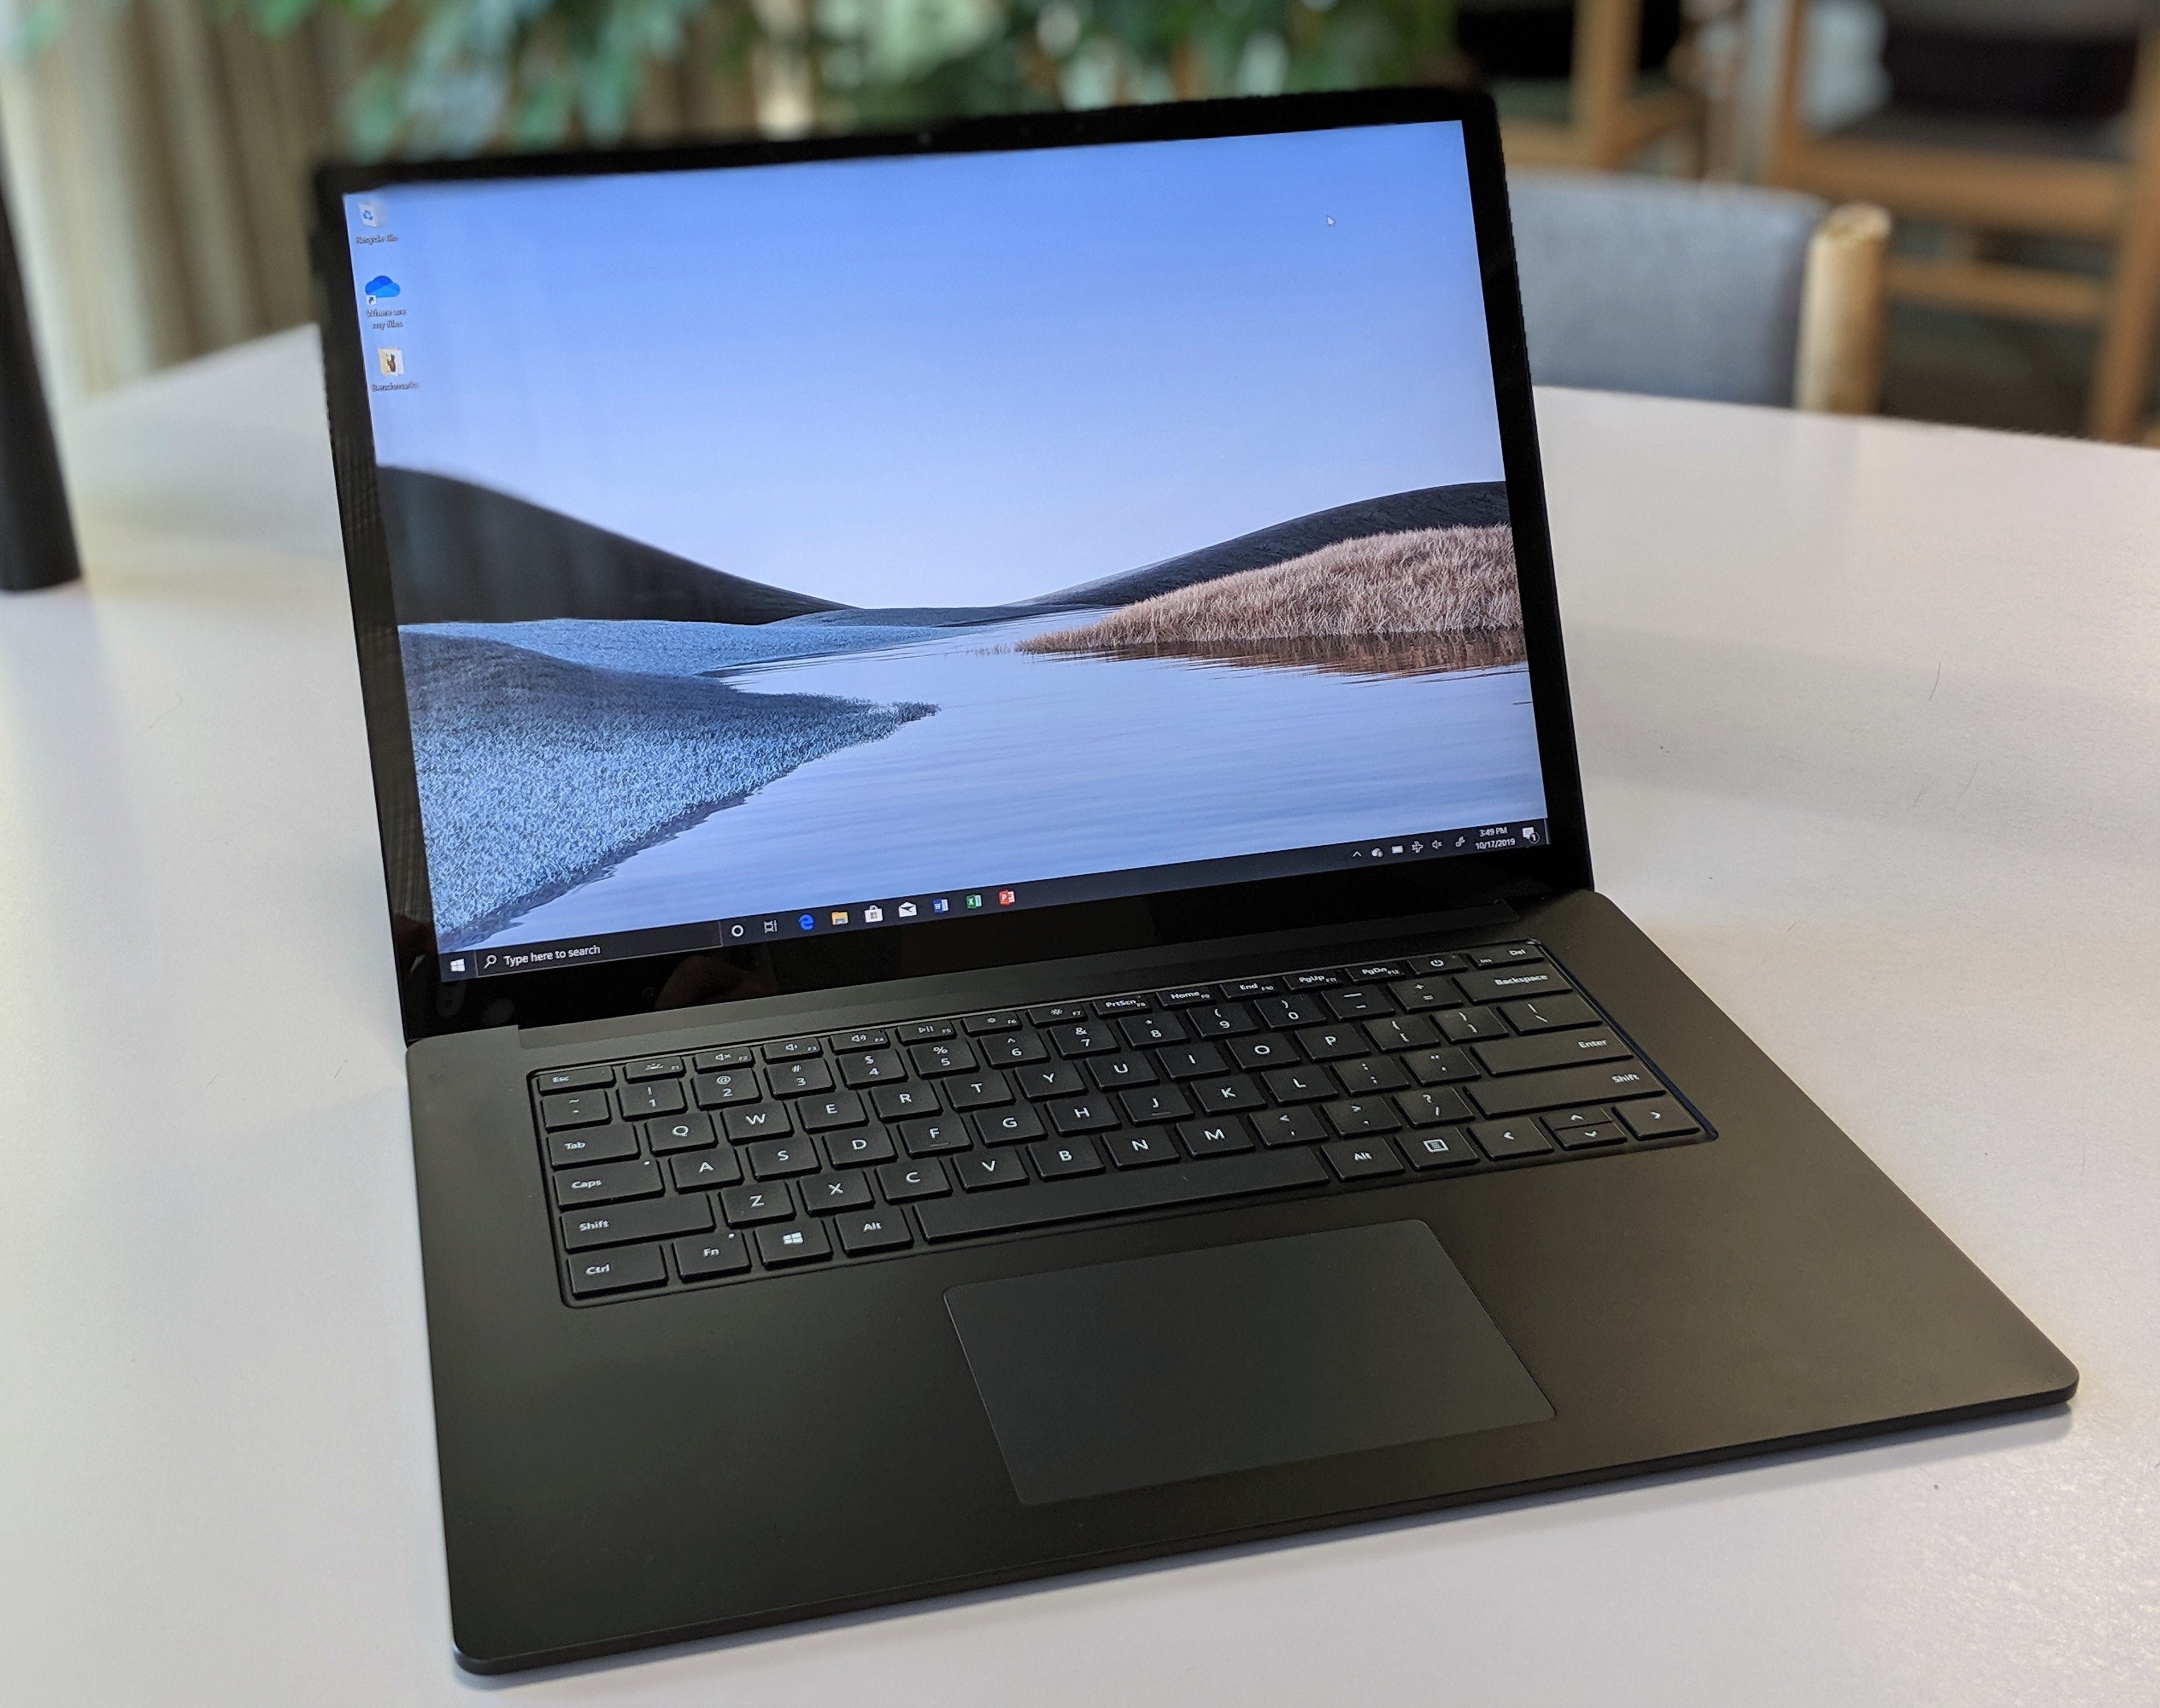 Microsoft Surface Laptop 3 15-inch (Ryzen 7) review: The price tag climbs, but battery life drops